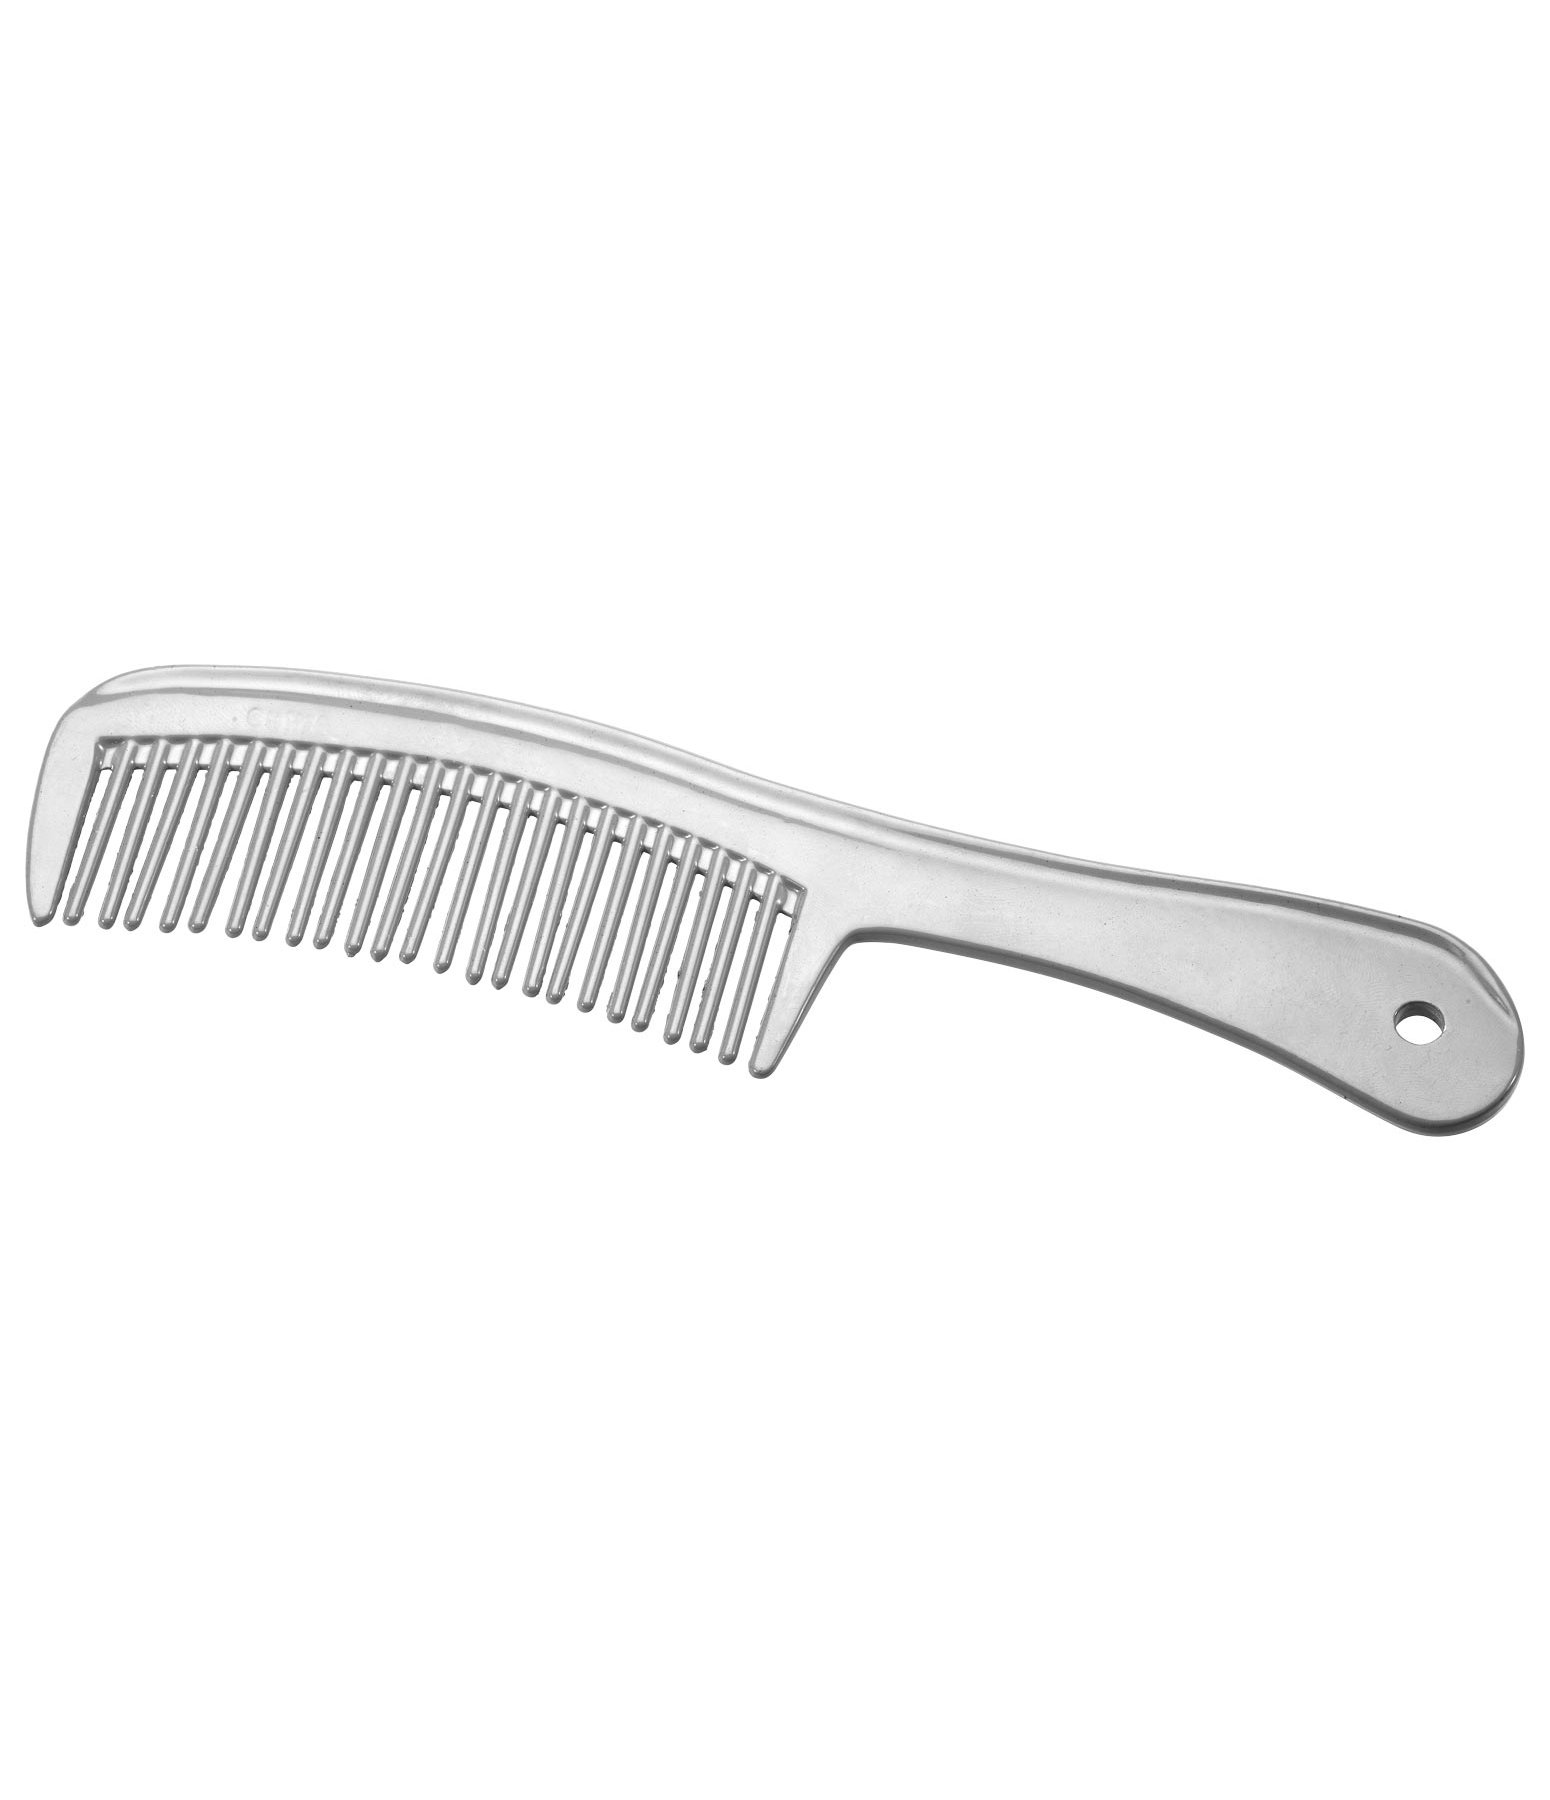 Mane Comb with Handle